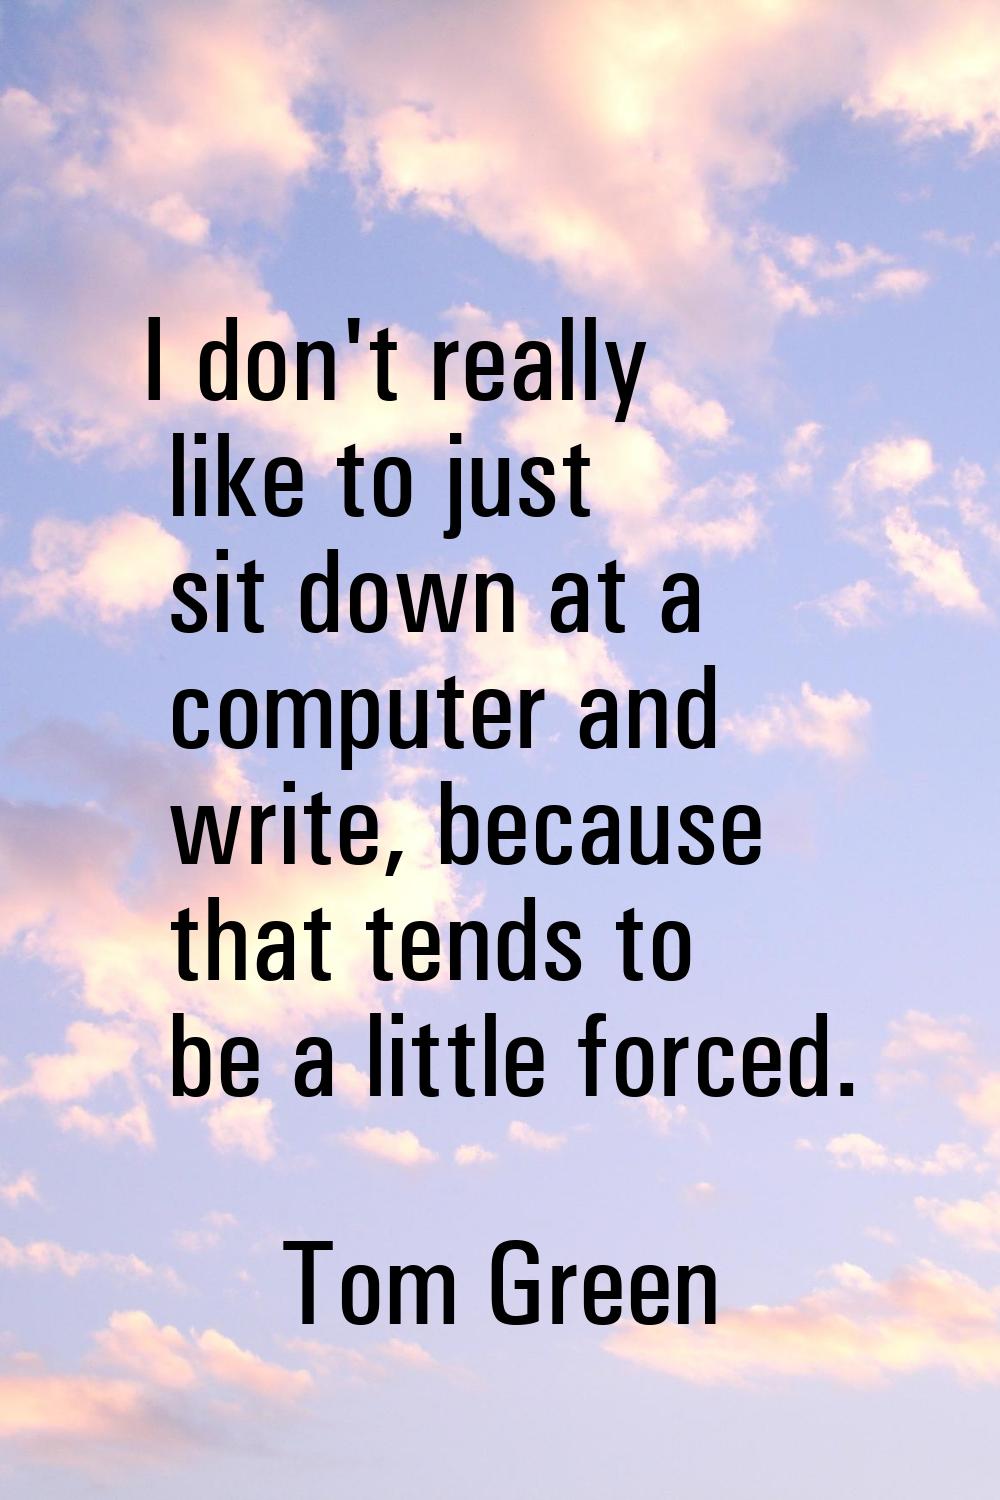 I don't really like to just sit down at a computer and write, because that tends to be a little for